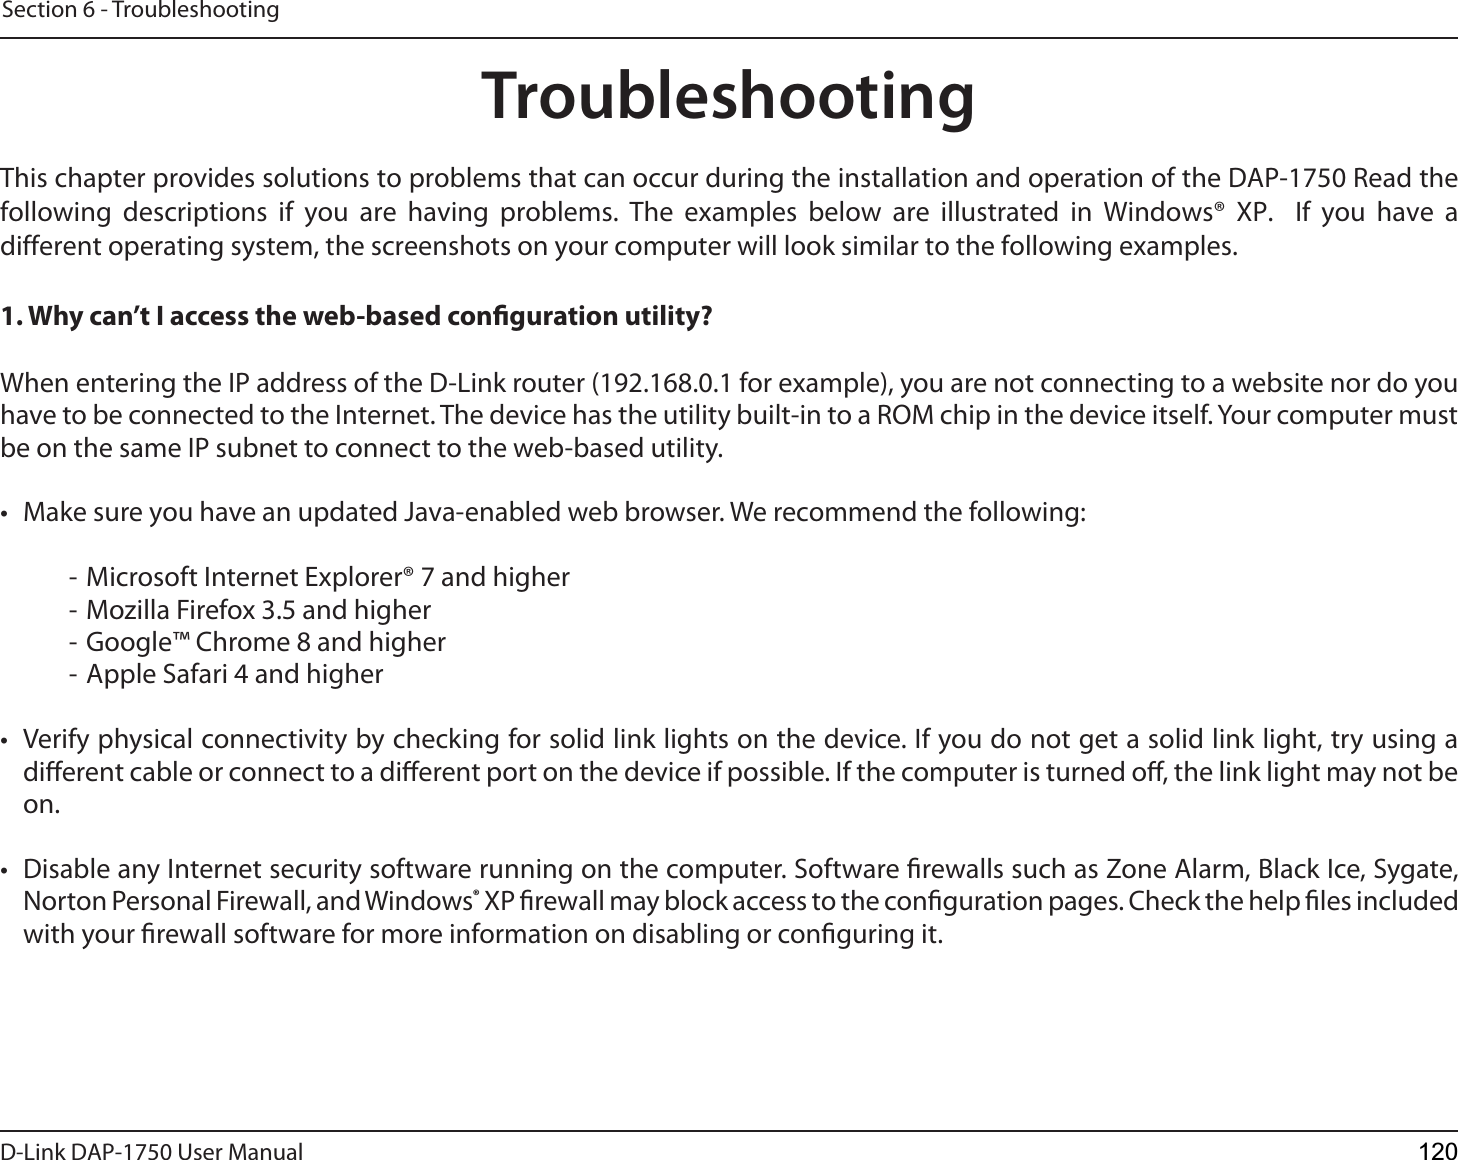 D-Link %&quot;1 User ManualSection 6 - TroubleshootingTroubleshootingThis chapter provides solutions to problems that can occur during the installation and operation of the %&quot;1 Read the following descriptions if you are having problems. The examples below are illustrated in Windows® XP.  If you have a different operating system, the screenshots on your computer will look similar to the following examples.1. Why can’t I access the web-based conguration utility?When entering the IP address of the D-Link router (192.168.0.1 for example), you are not connecting to a website nor do you have to be connected to the Internet. The device has the utility built-in to a ROM chip in the device itself. Your computer must be on the same IP subnet to connect to the web-based utility. • Make sure you have an updated Java-enabled web browser. We recommend the following:- Microsoft Internet Explorer® 7 and higher- Mozilla Firefox 3.5 and higher- Google™ Chrome 8 and higher- Apple Safari 4 and higher• Verify physical connectivity by checking for solid link lights on the device. If you do not get a solid link light, try using adierent cable or connect to a dierent port on the device if possible. If the computer is turned o, the link light may not beon.• Disable any Internet security software running on the computer. Software rewalls such as Zone Alarm, Black Ice, Sygate,Norton Personal Firewall, and Windows® XP rewall may block access to the conguration pages. Check the help les includedwith your rewall software for more information on disabling or conguring it.120